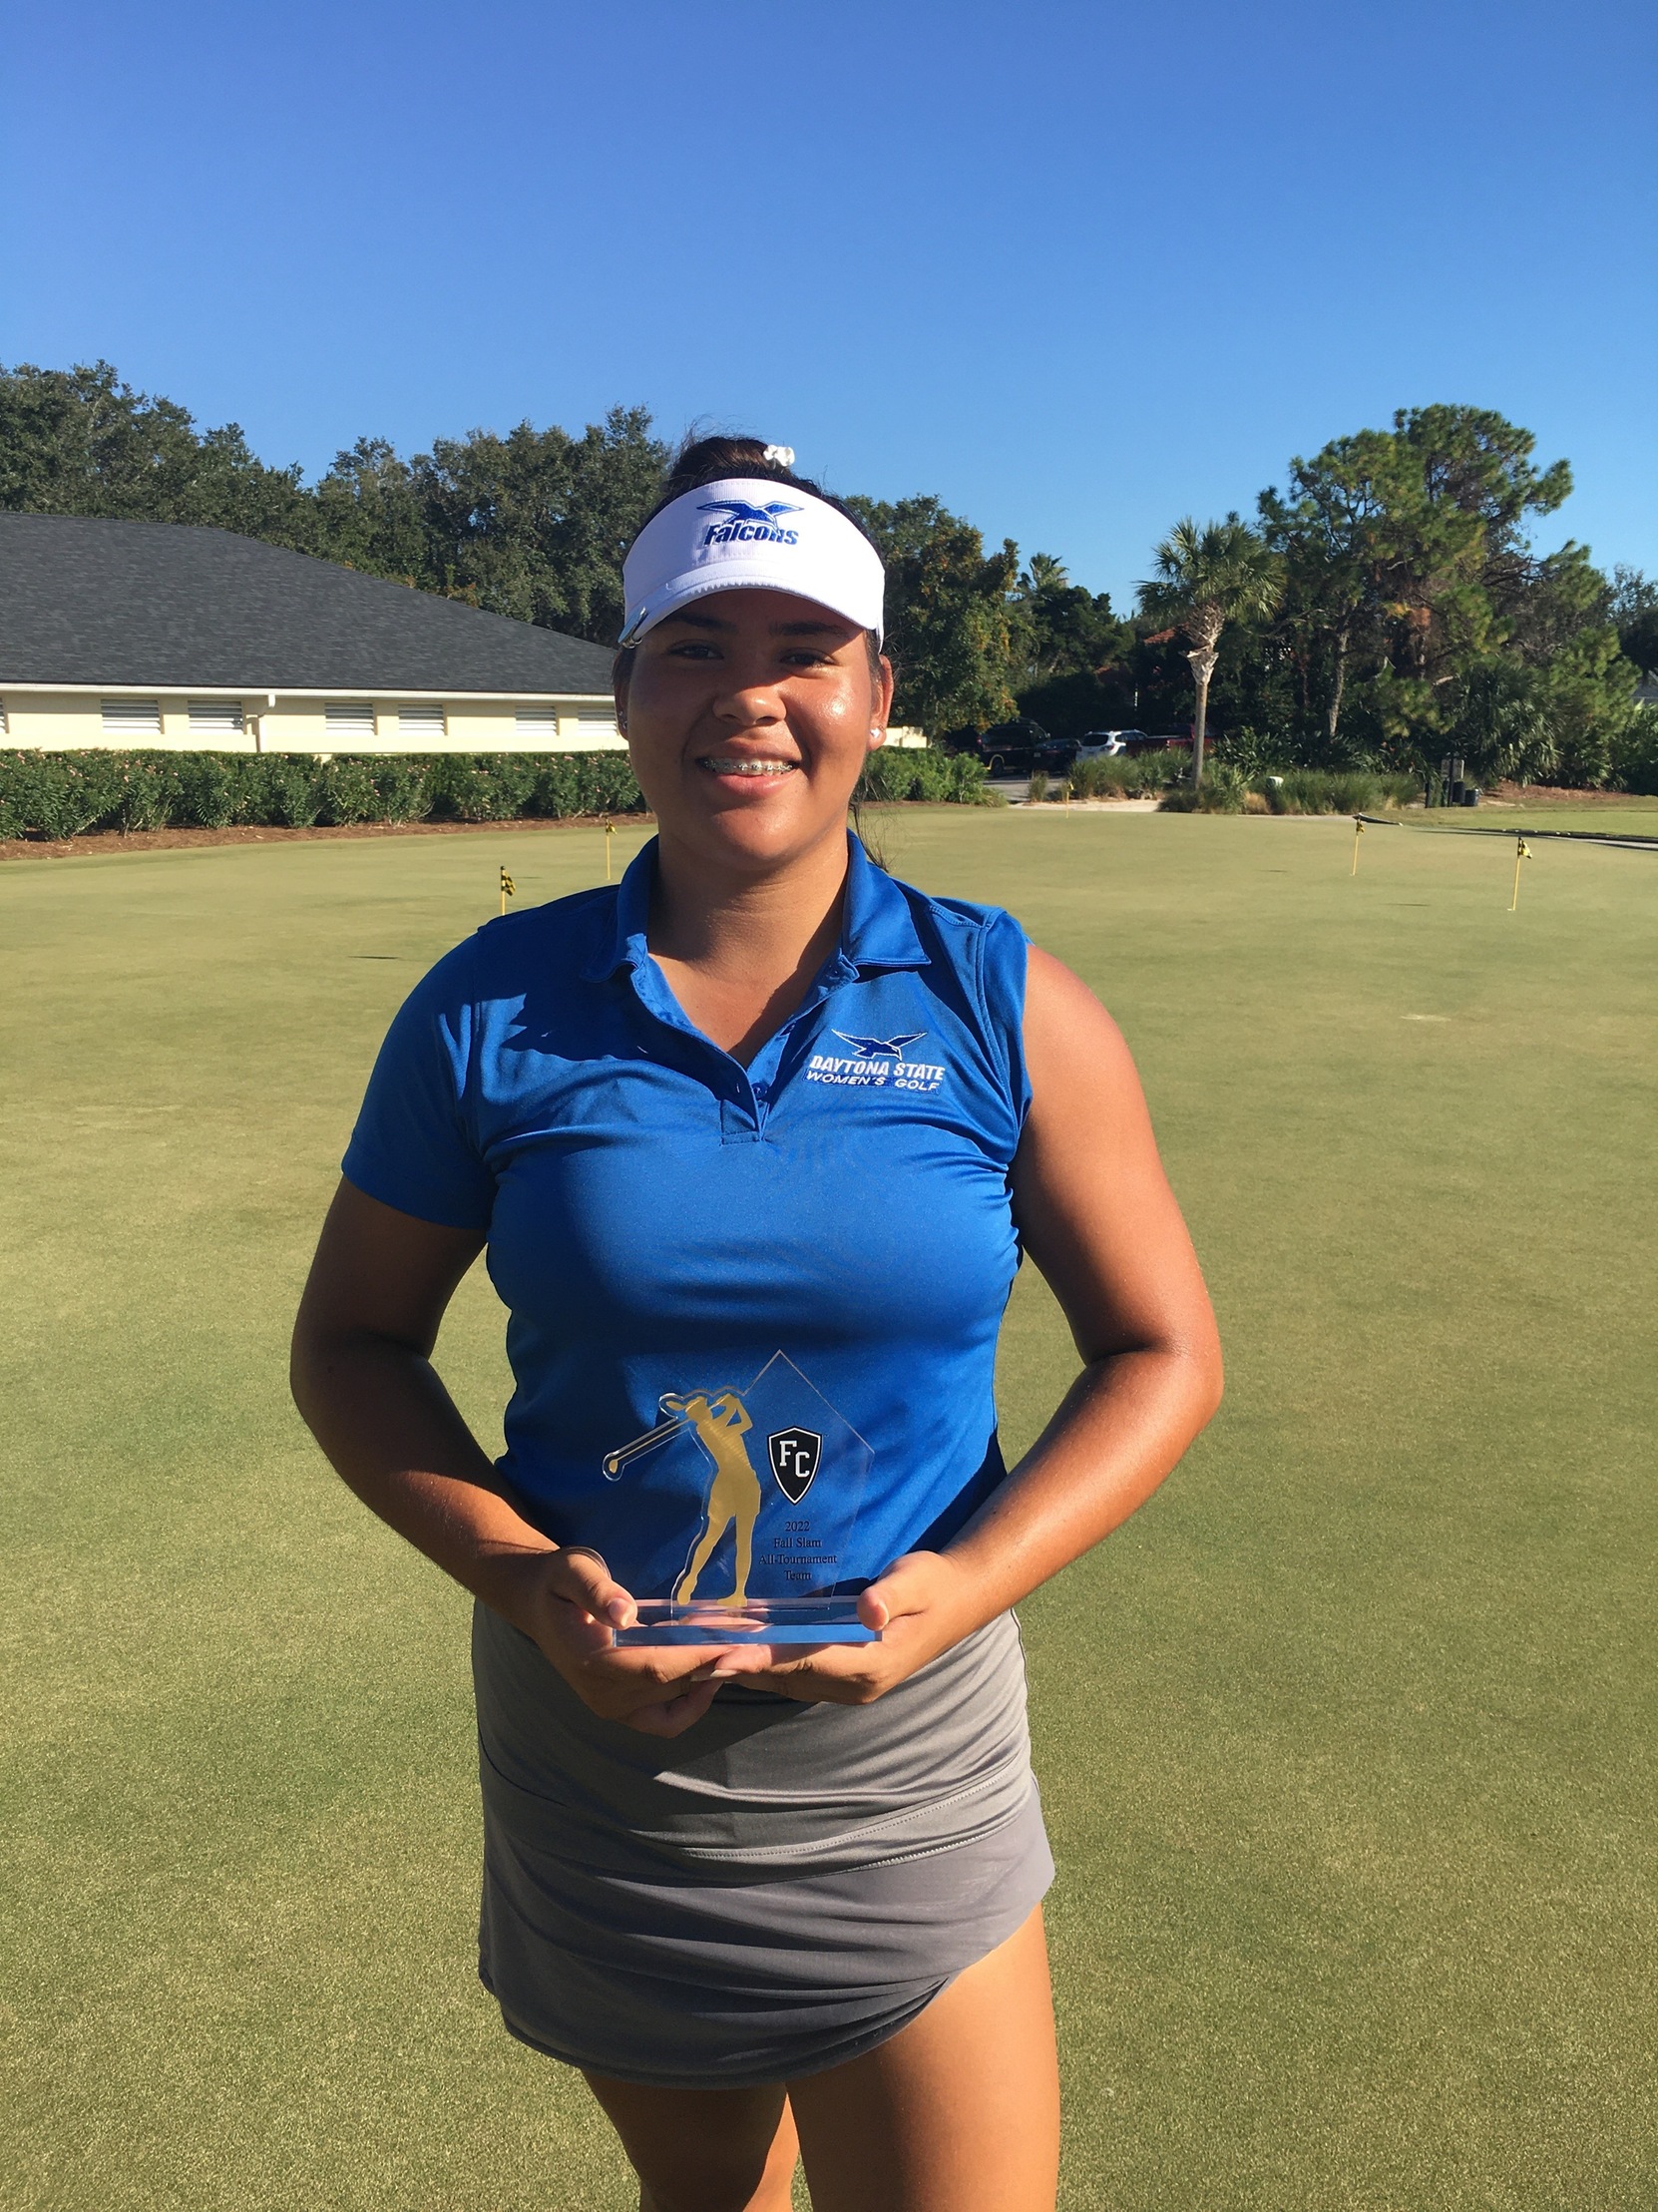 ANGELICA HOLMAN FINISHES 2ND AT FLAGLER FALL SLAM, TEAM FINISHES 3RD